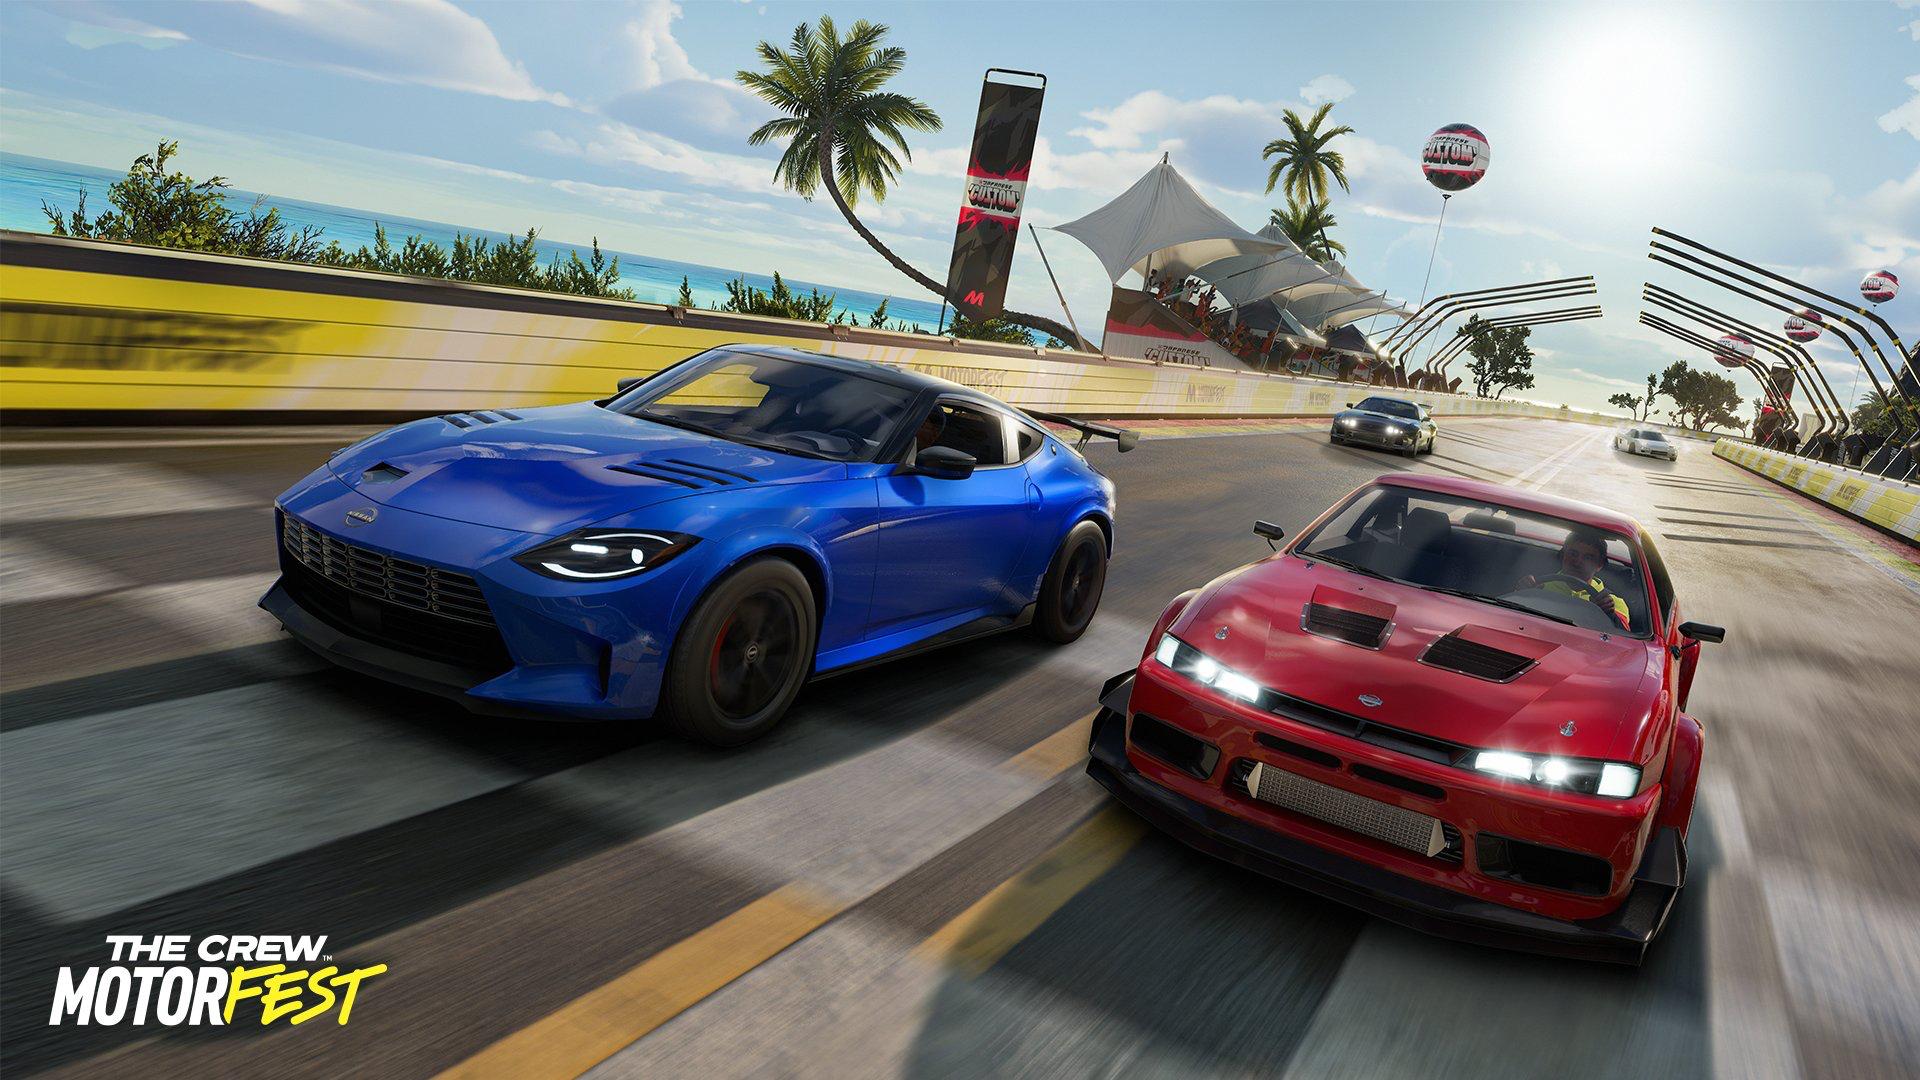 The Crew Motorfest announced by Ubisoft